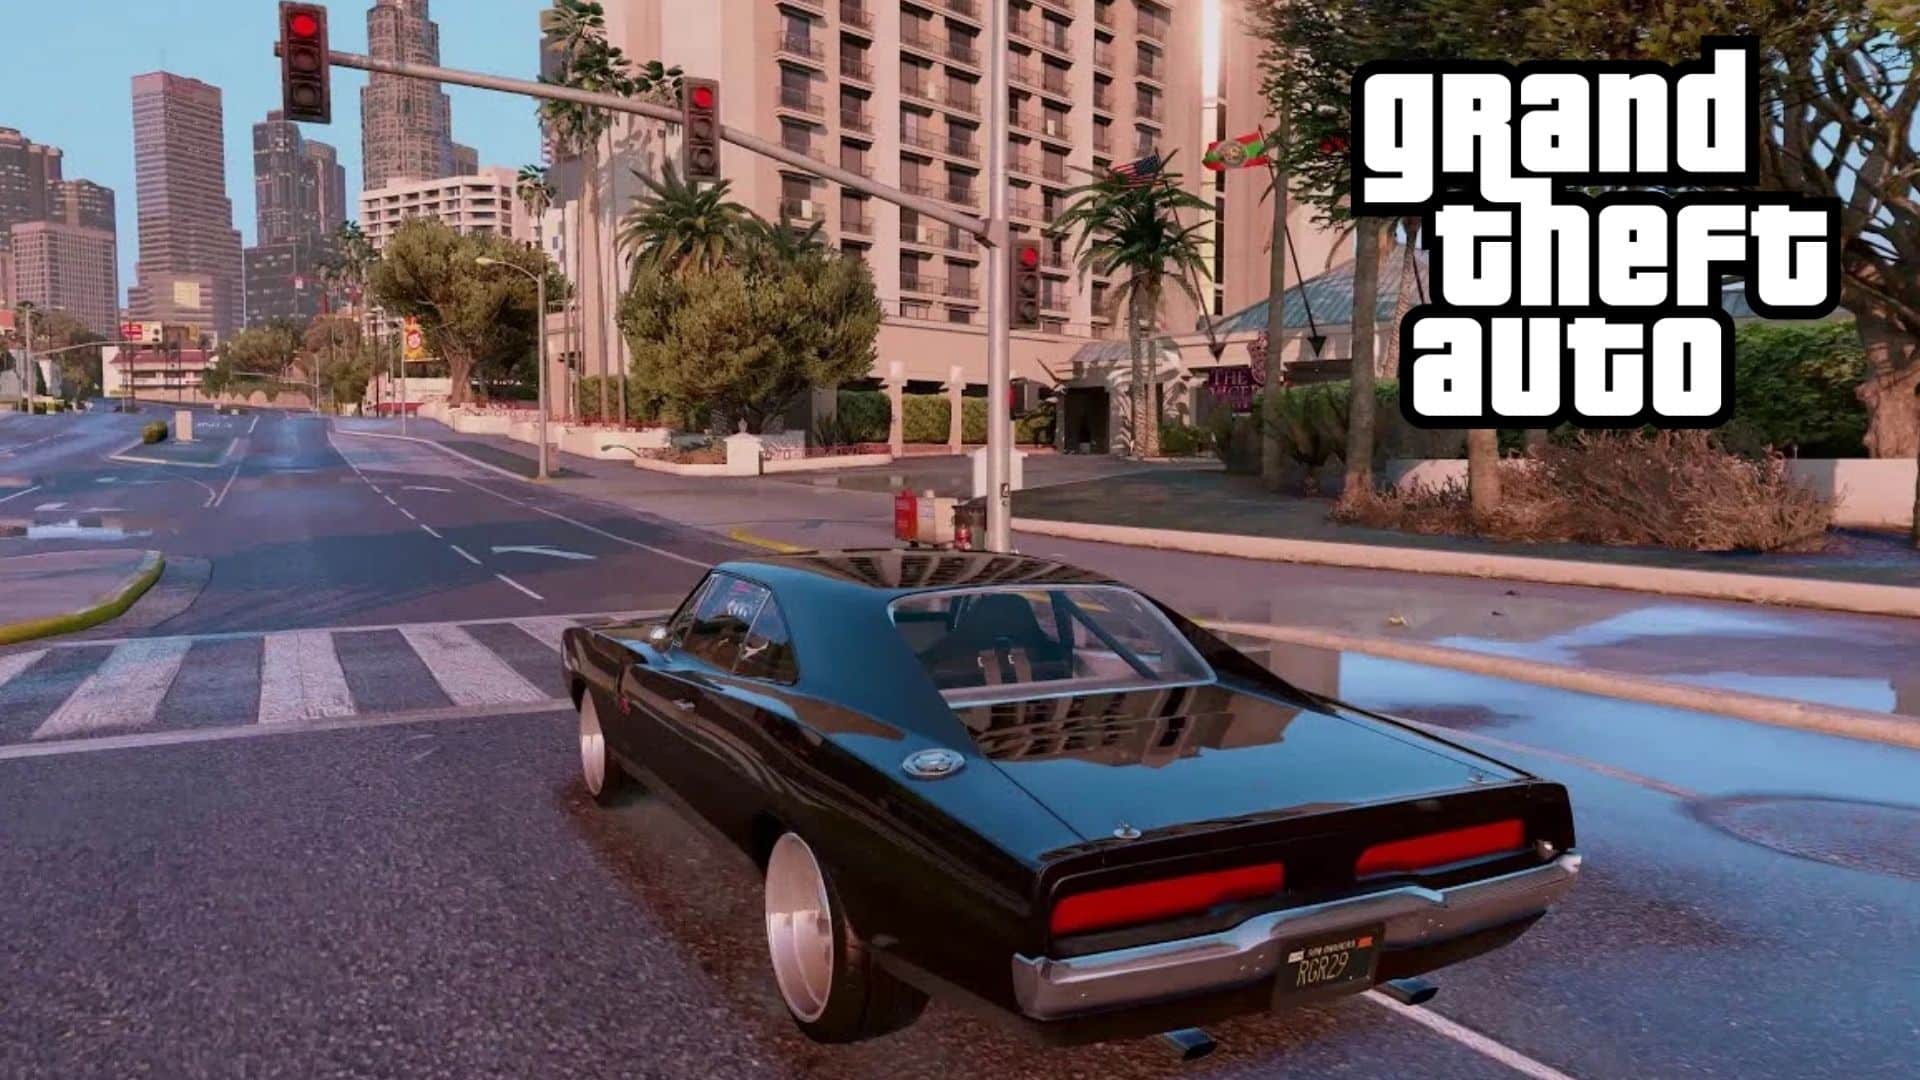 Leaked GTA 6 image “confirmed” after being found in San Andreas